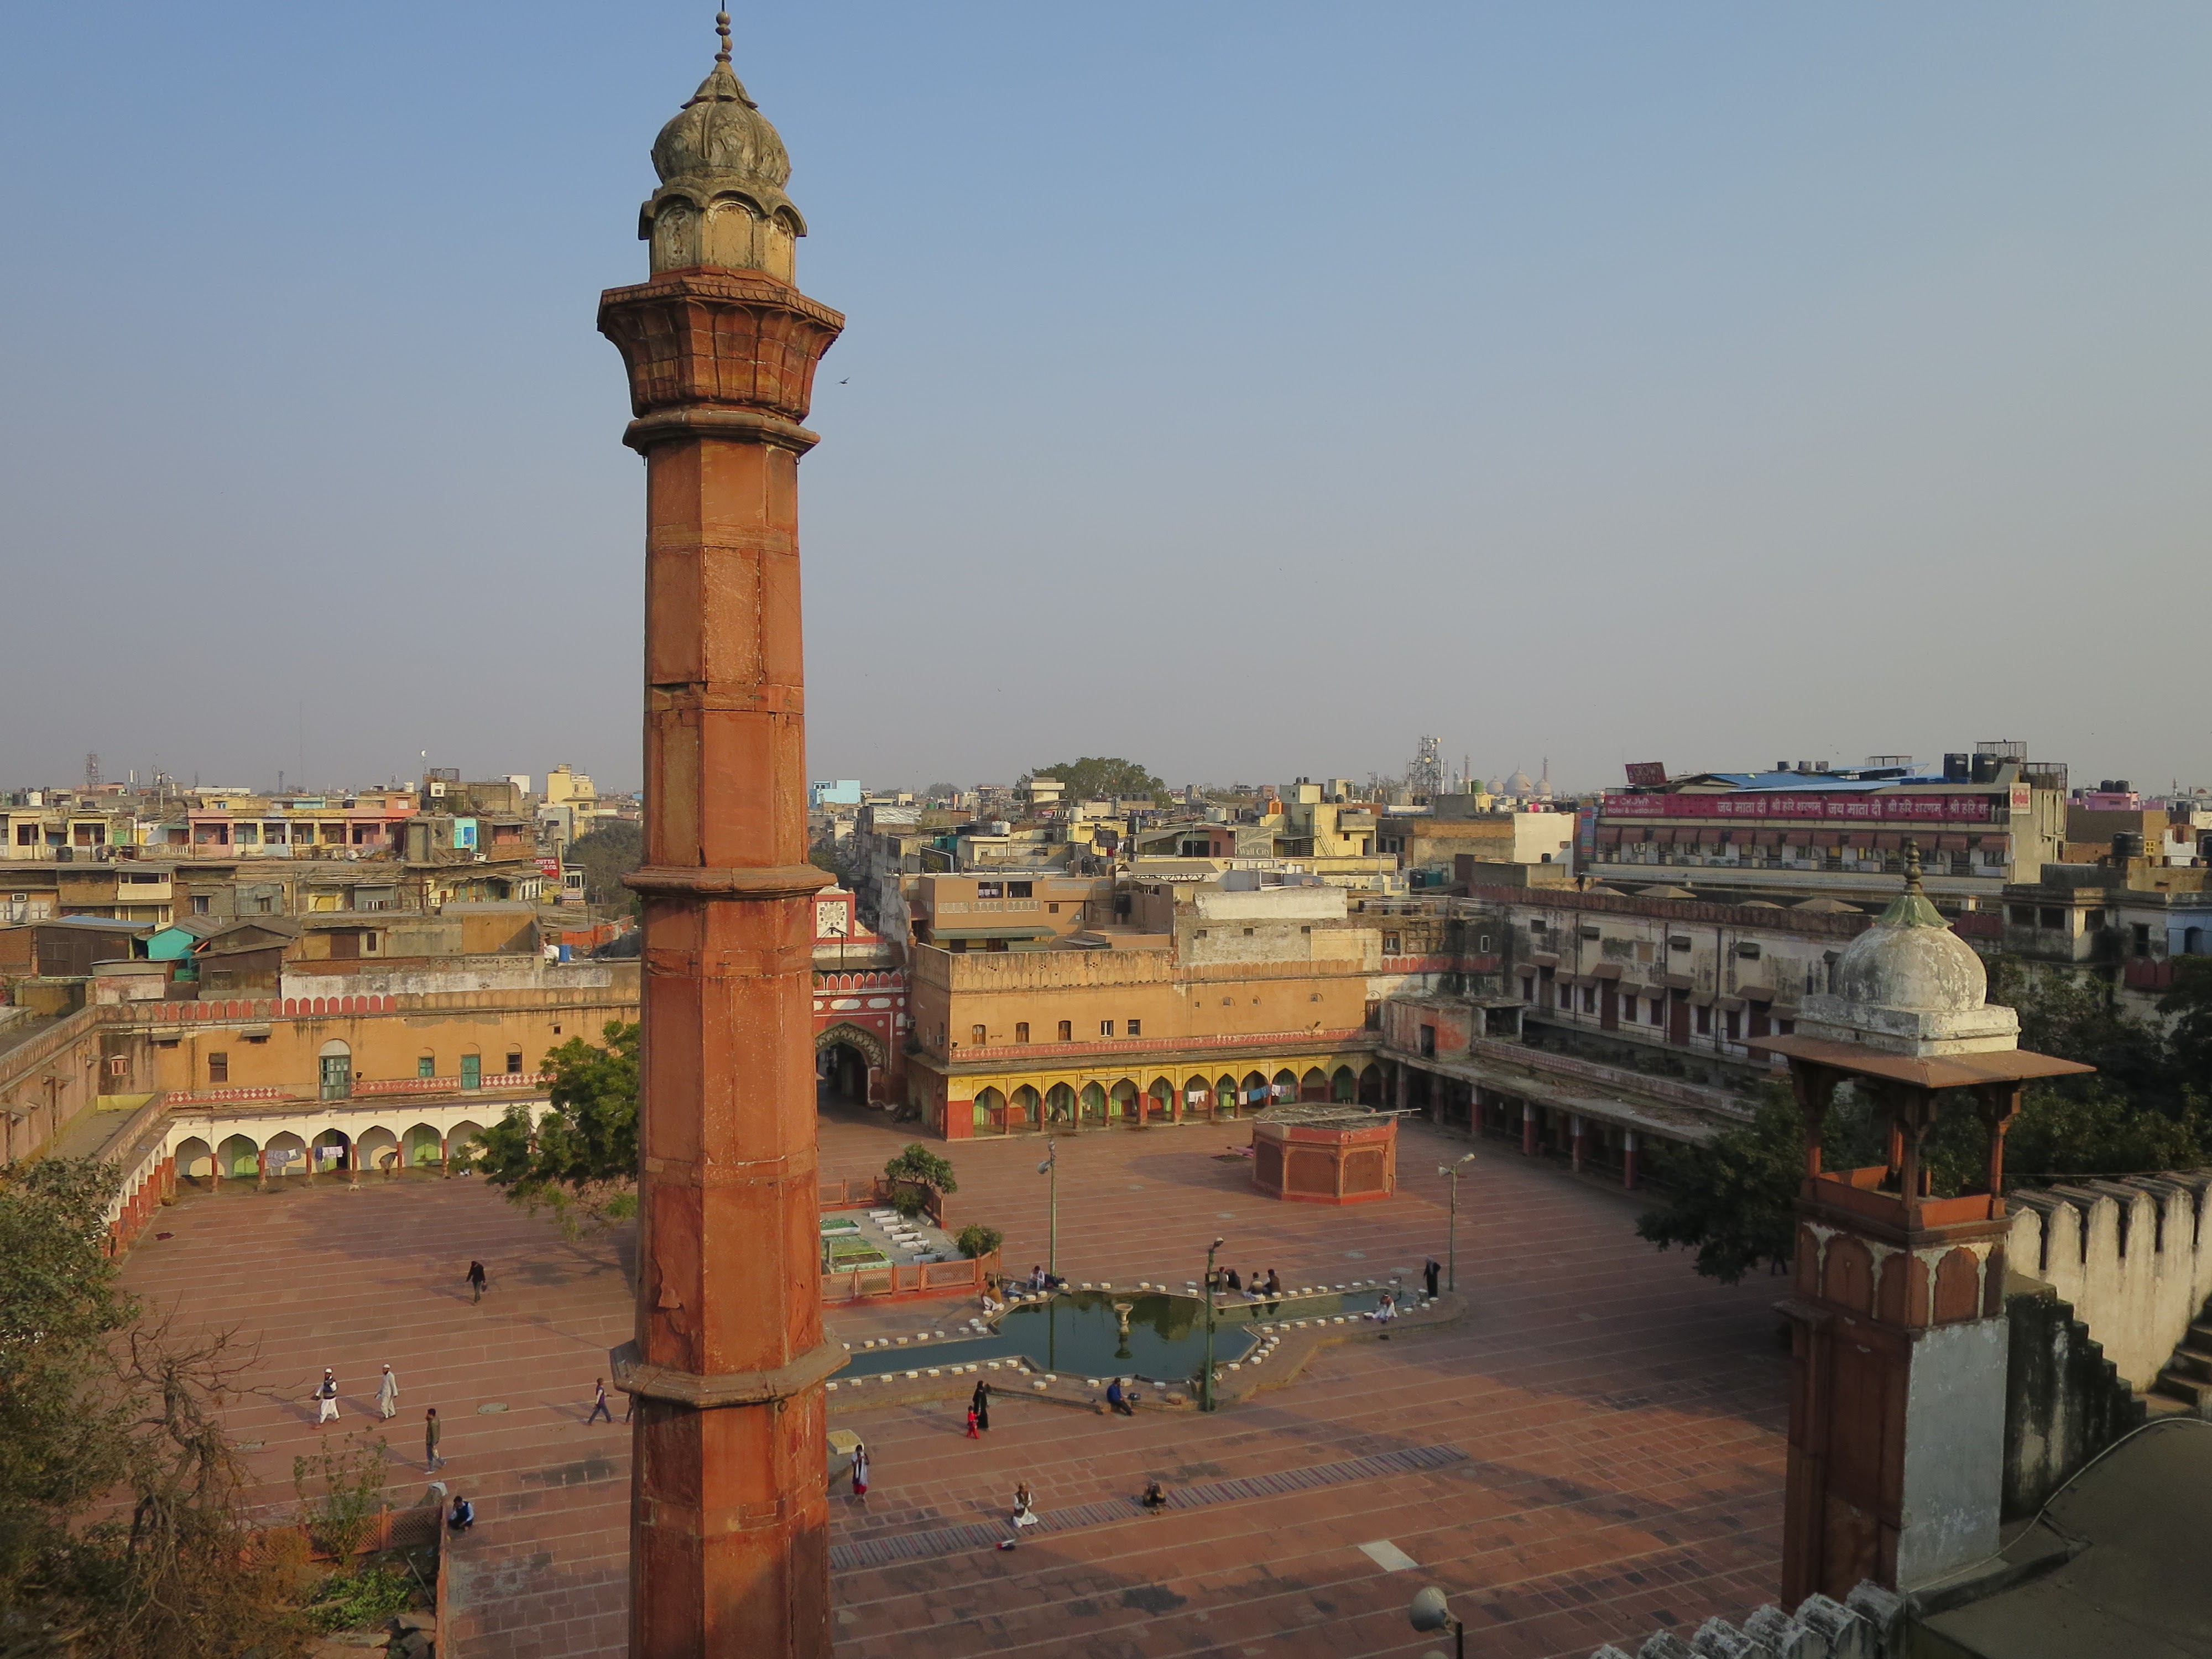 The photographer is atop a 4 story building, looking down on the city of Delhi. There is a large clay red tower in the foreground. Beyond that is a clay red square with several trees. The two story buildings surrounding the square have dozens of one story arches leading onto the square. The colors in the picture are mainly tans, browns, tellows, clay red, and all bright colors are muted by a layer of dust. The sky has no clouds but is more gray than blue.